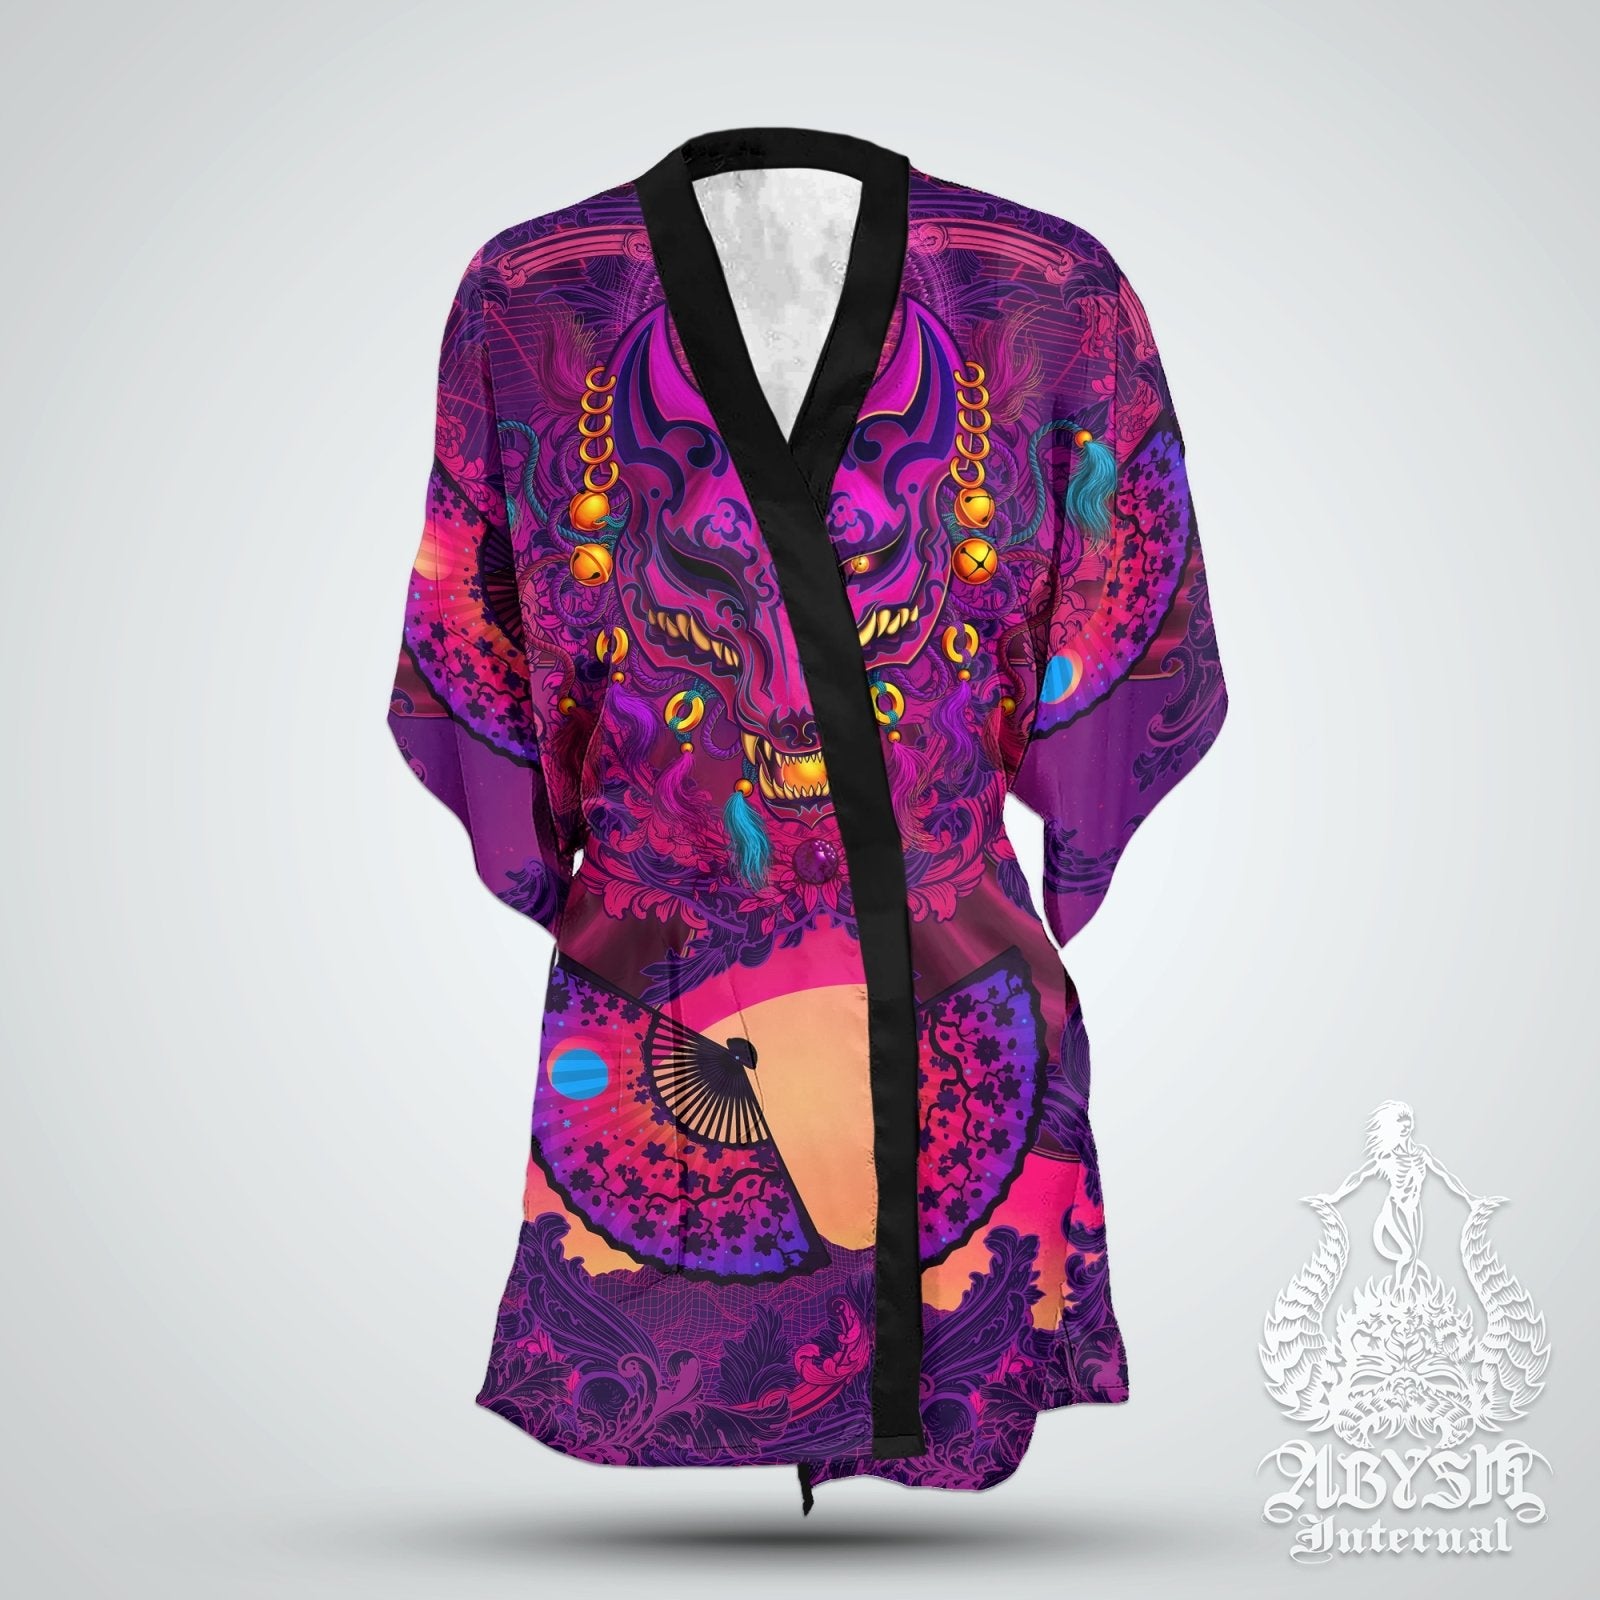 Anime Convention Cover Up, Synthwave Outfit, Retrowave Party Kimono, Vaporwave Summer Festival Robe, Japanese Art, Psychedelic 80s, Alternative Clothing, Unisex - Kitsune - Abysm Internal